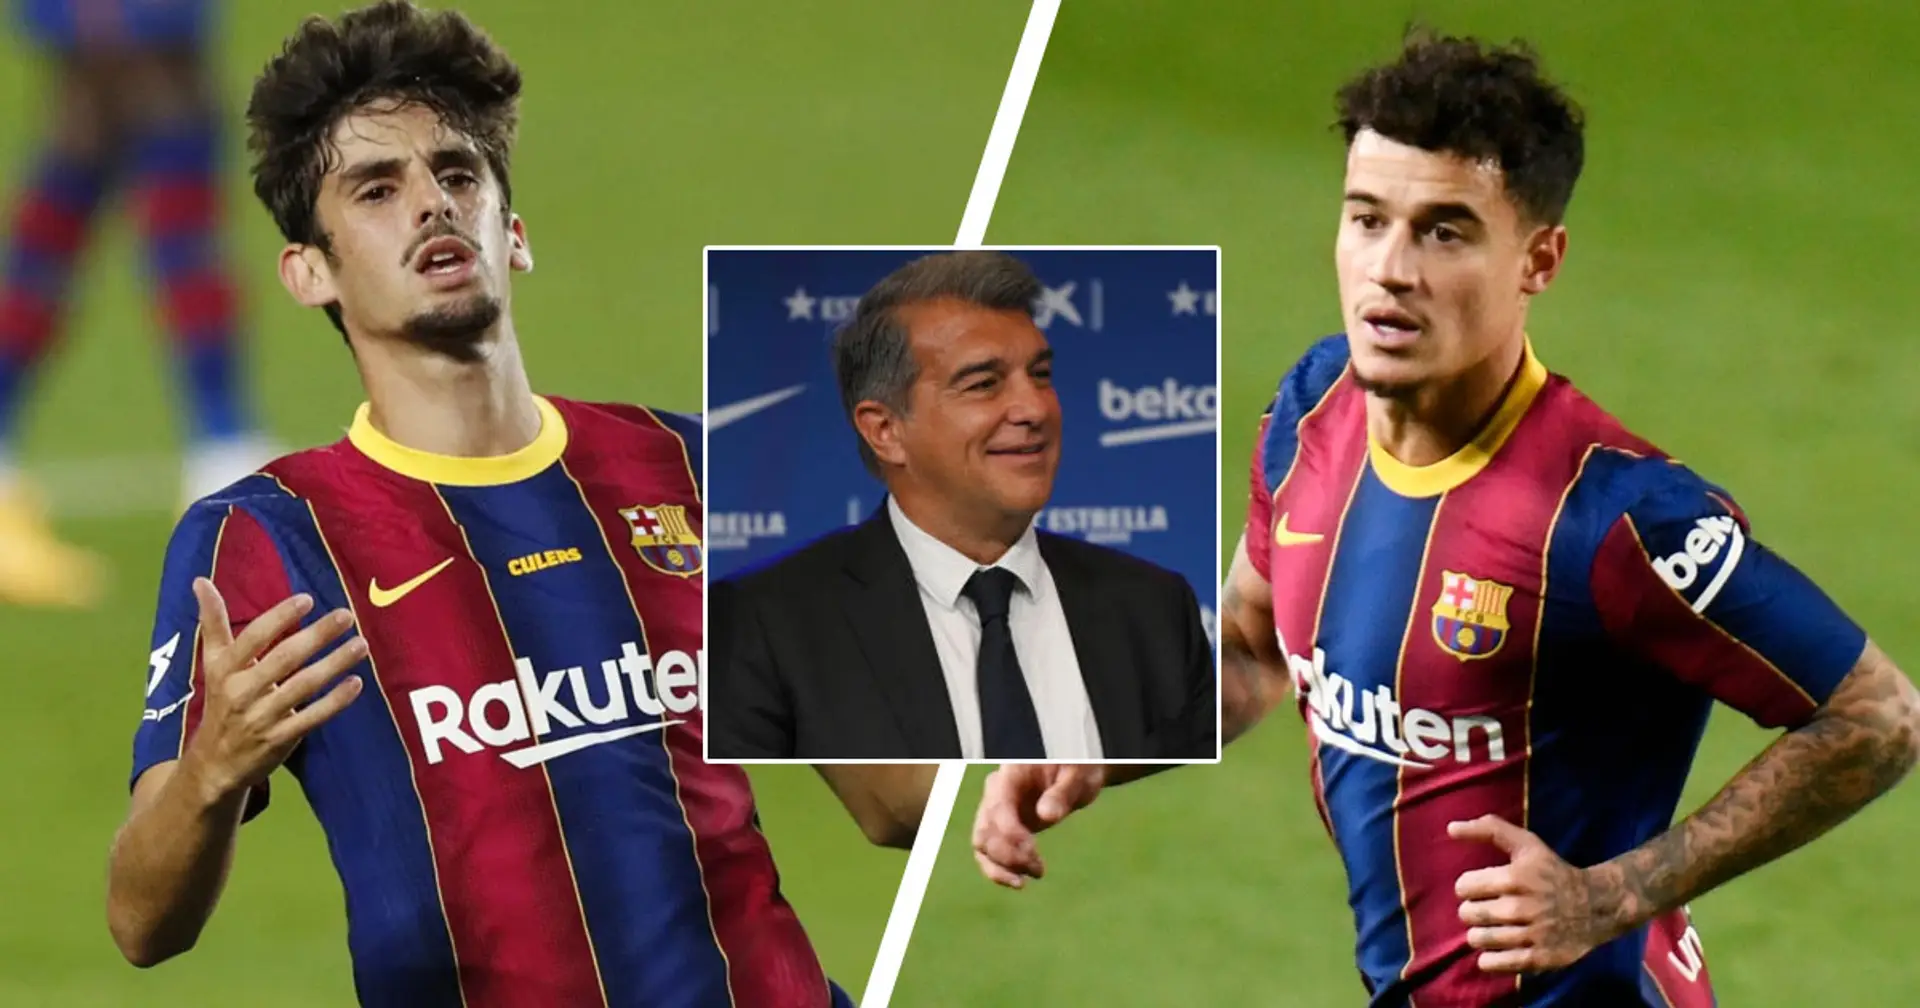 Barca identify 11 players to sell in order to save €200m in wages (reliability: 4 stars)